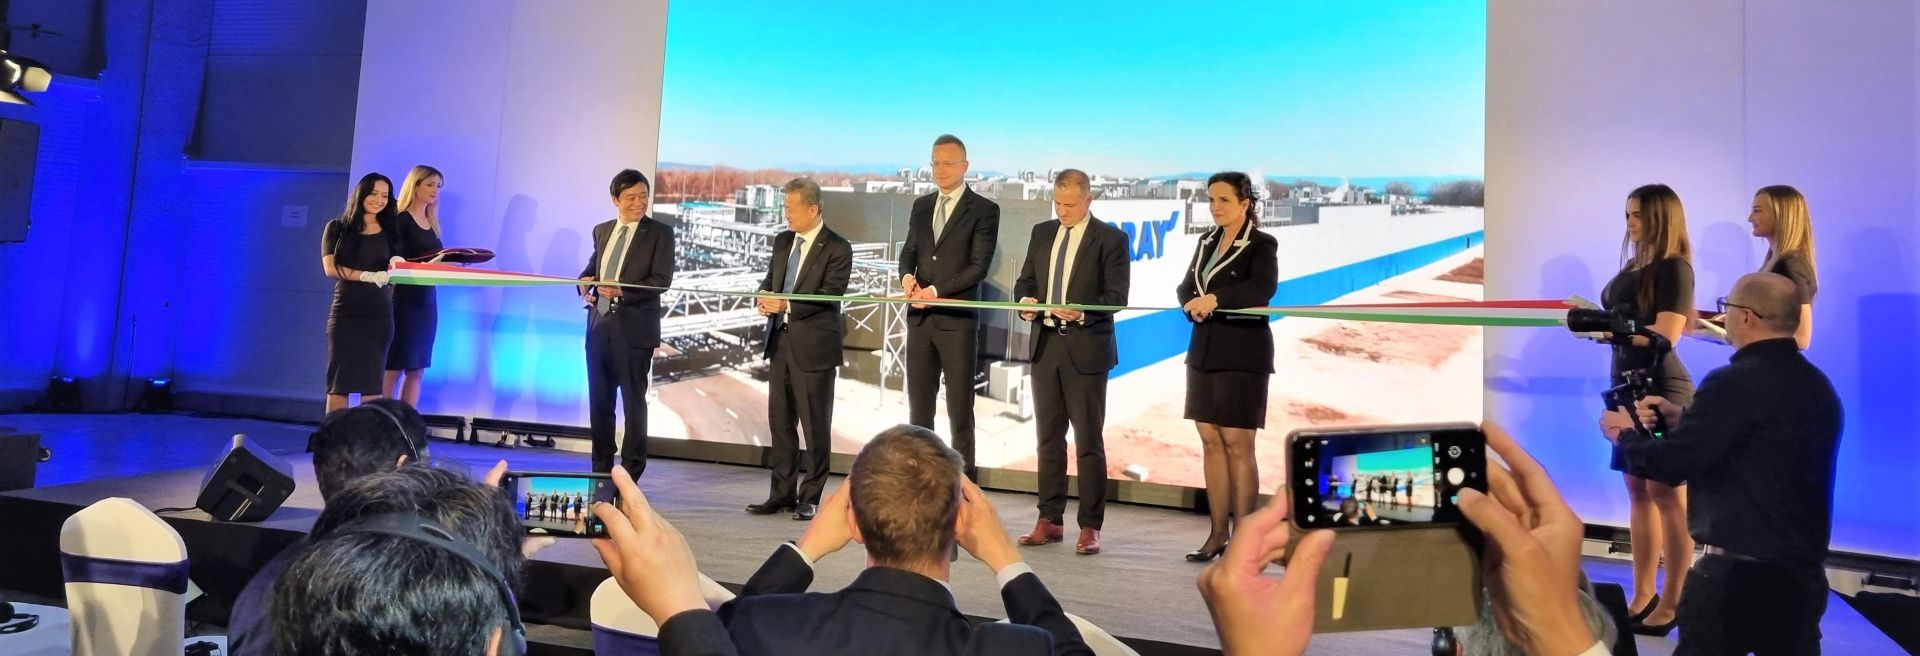 Toray’s Green Innovation-Themed Investment To Add To Hungary’s EV Power - VIDEO REPORT